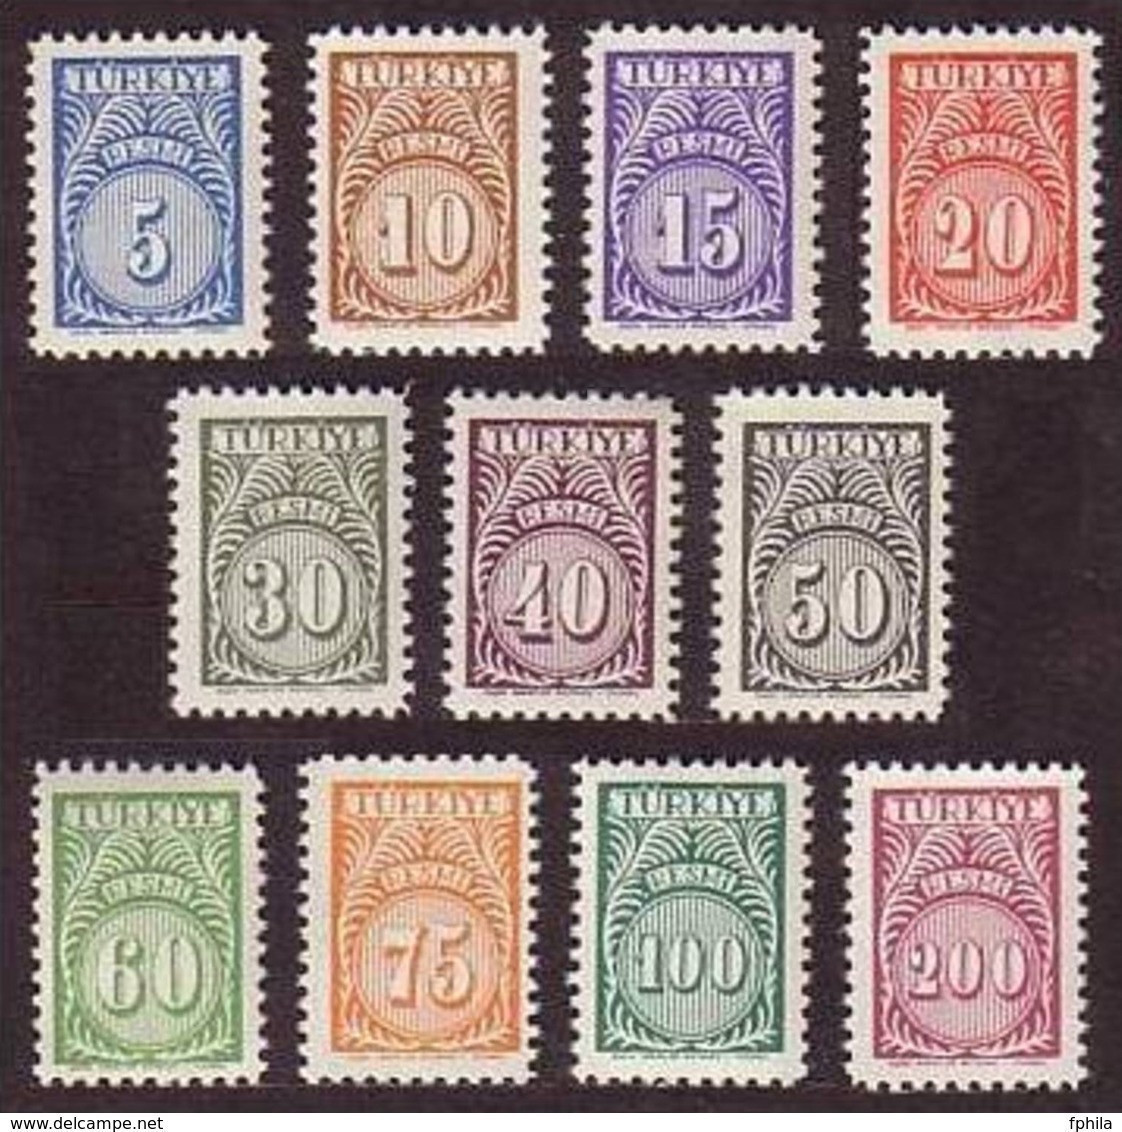 1957 TURKEY OFFICIAL STAMPS MNH ** - Official Stamps